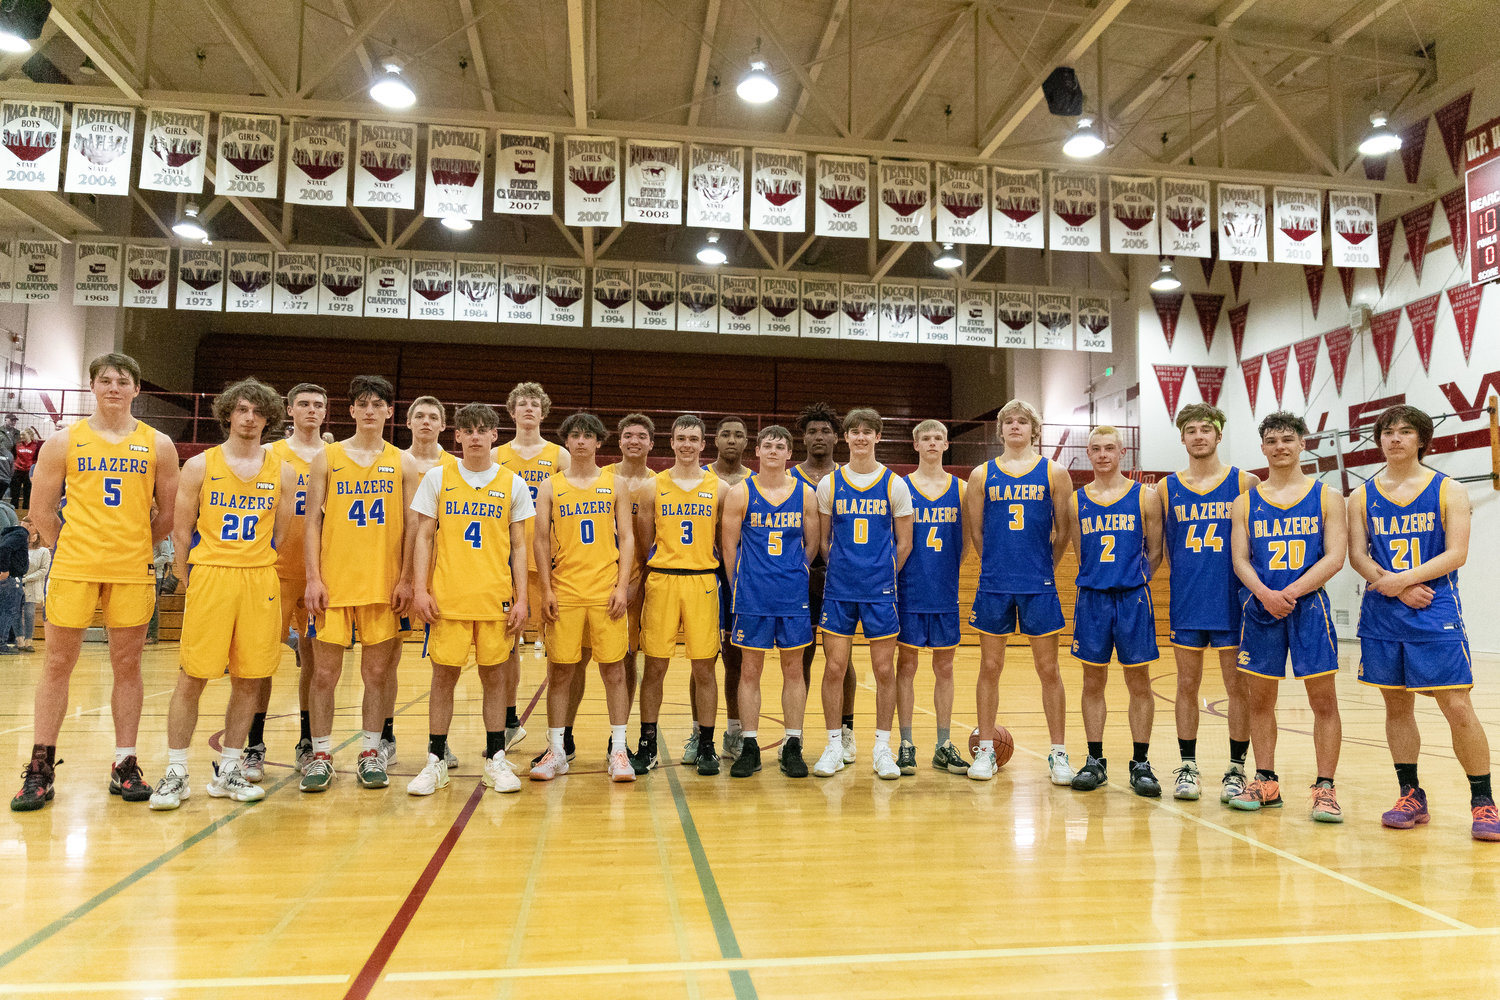 The SWW Senior All-Star Game Participants pose for a photo March 26 at W.F. West.